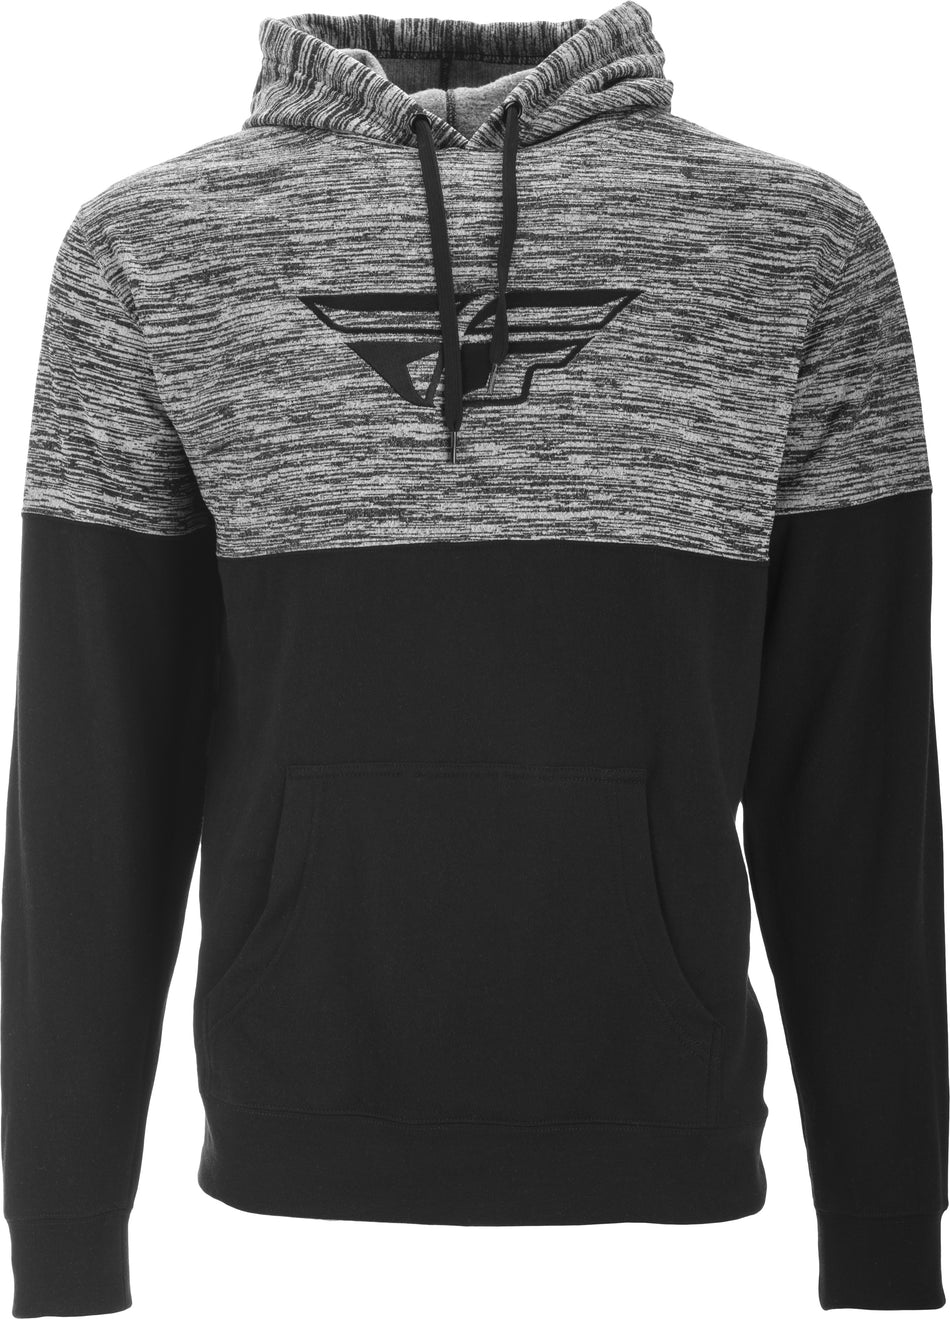 FLY RACING Fly F-Wing Pullover Hoodie Black Noise Lg 354-0228L